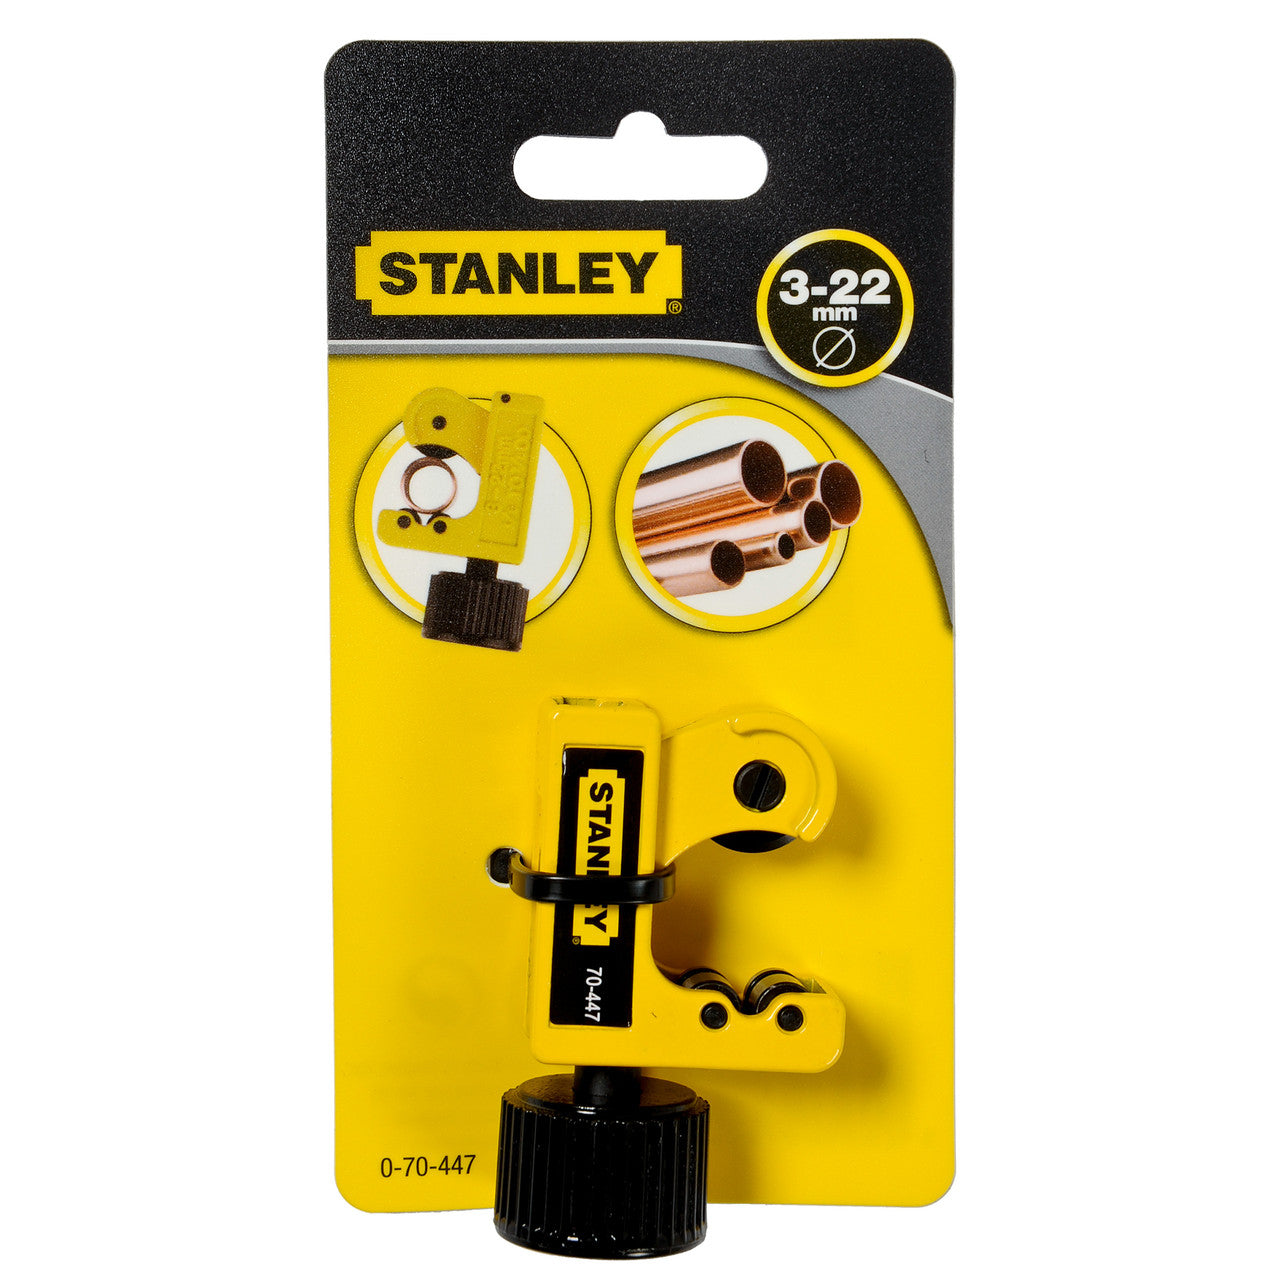 Stanley 0-70-447 Adjustable Pipe Cutter 3-22mm